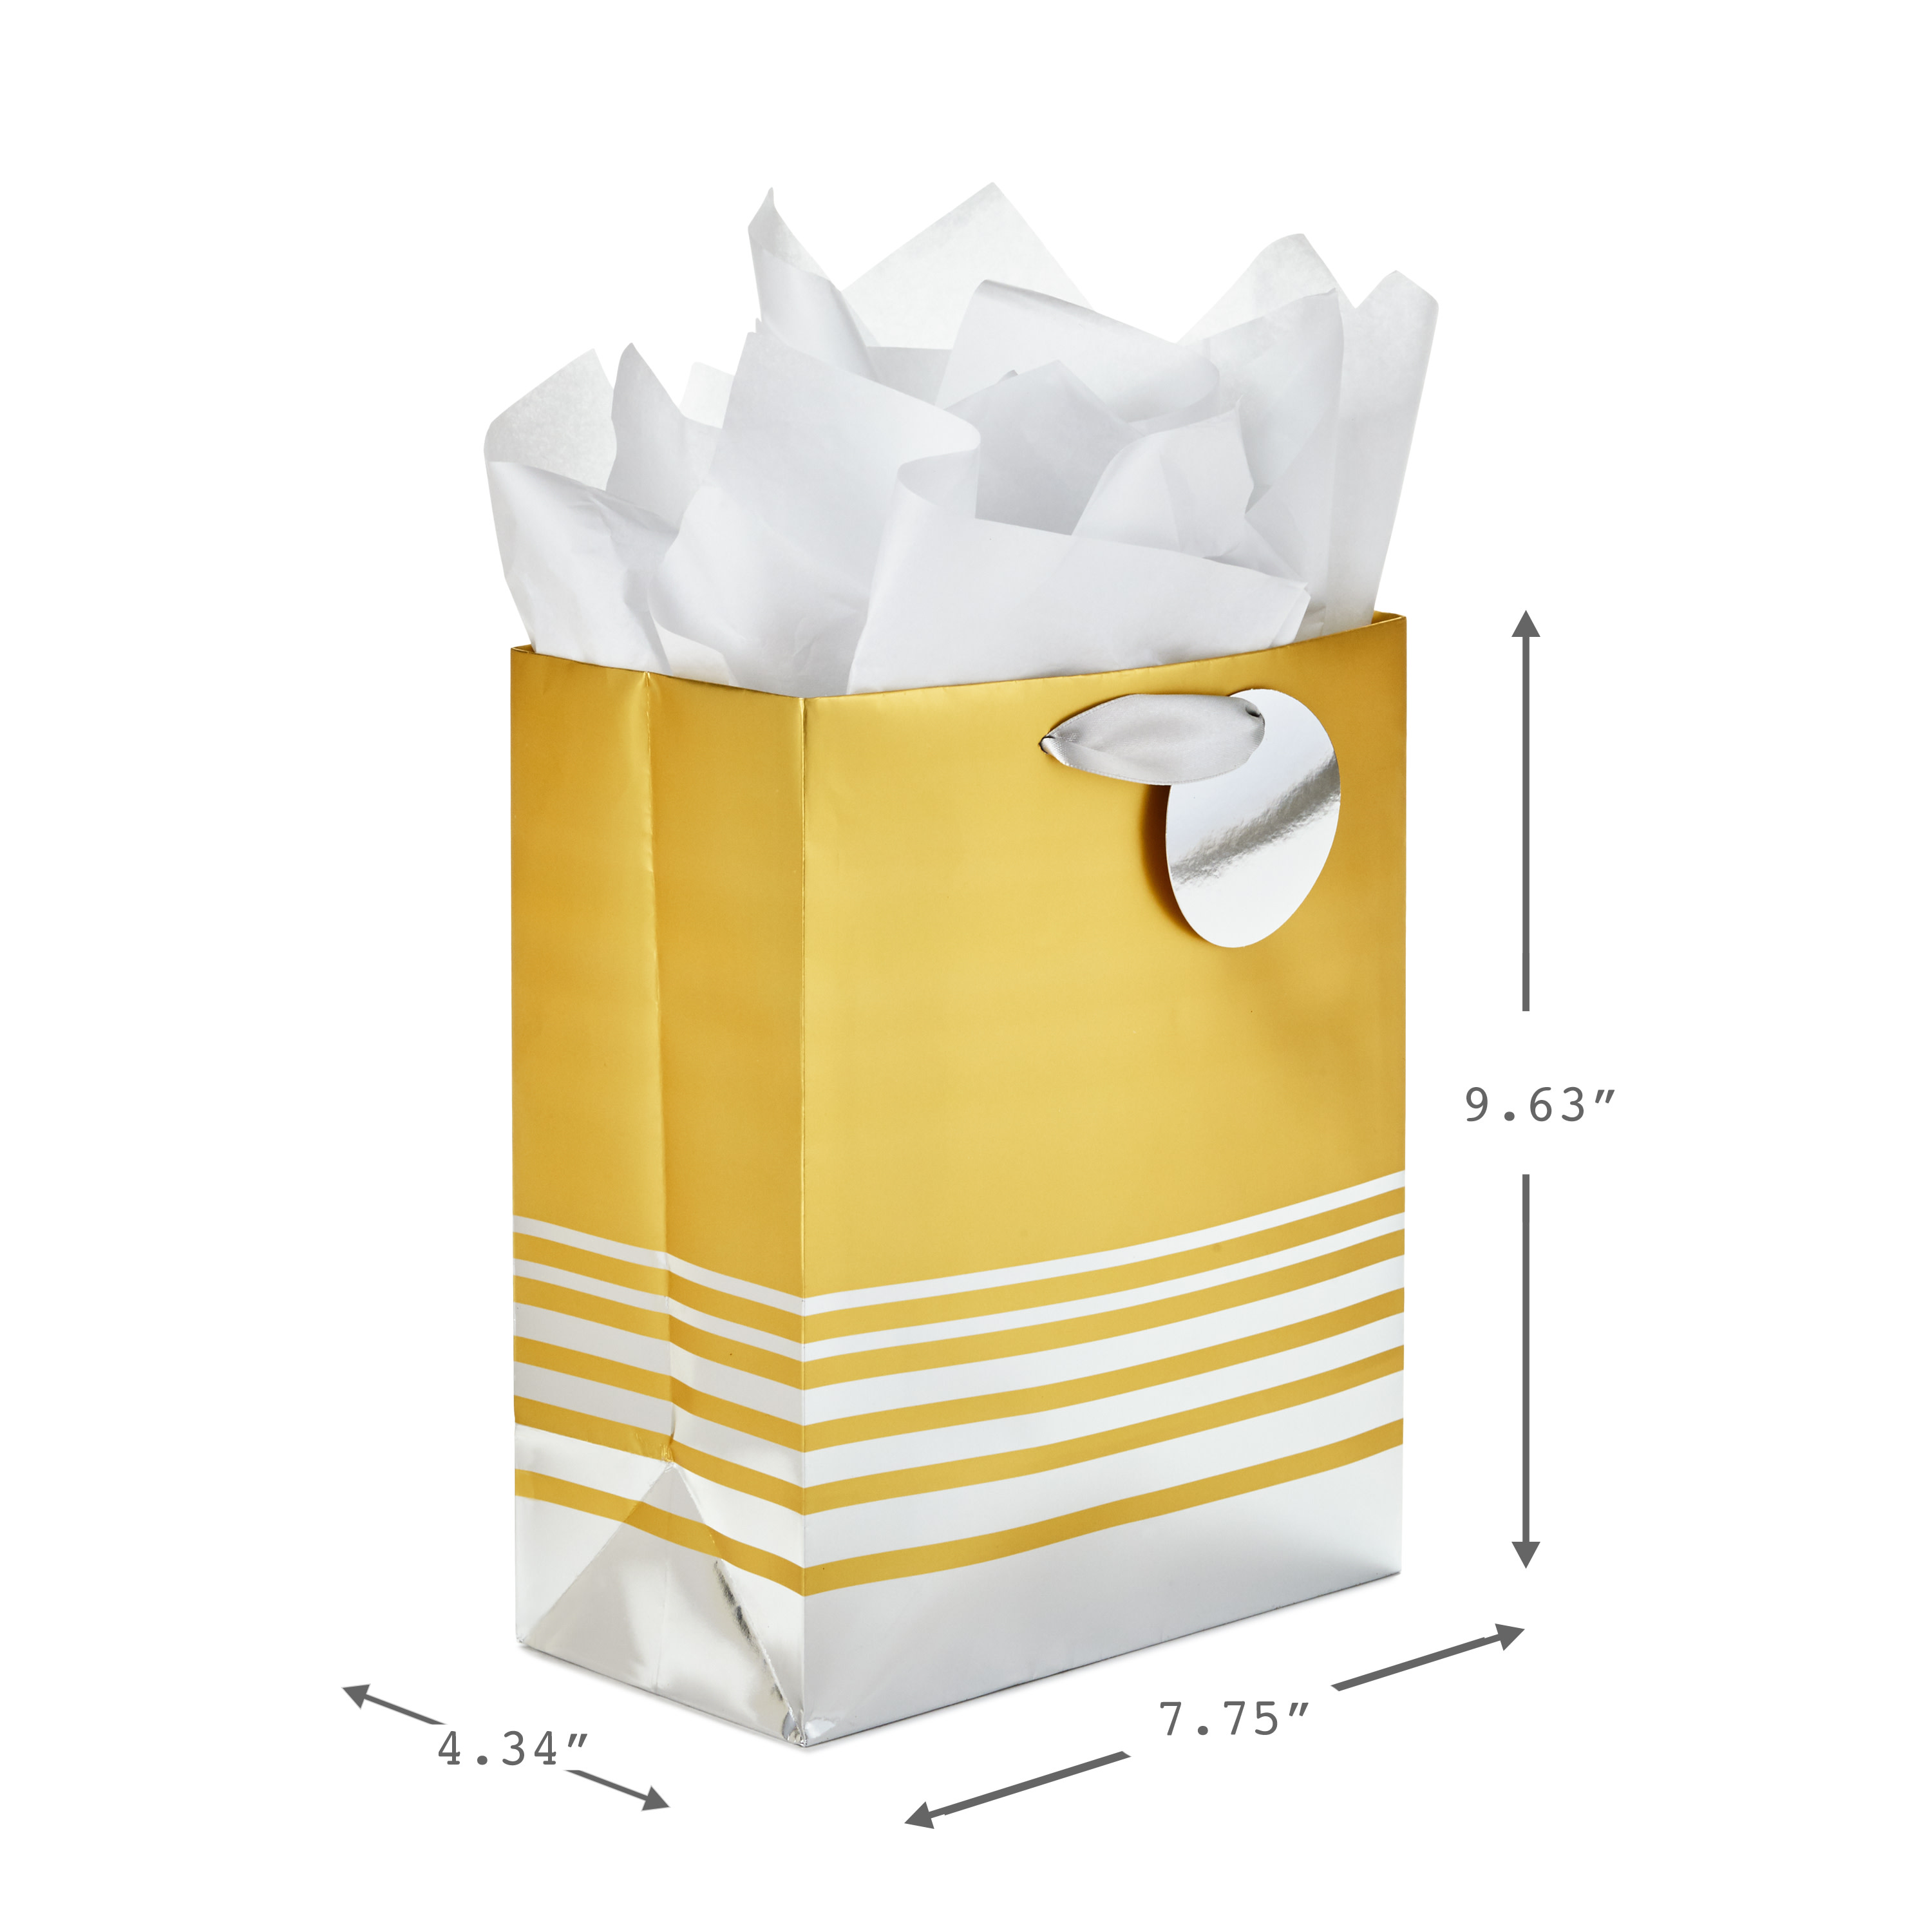 Hallmark 9" Medium Gift Bag with Tissue Paper (Silver and Gold Foil) for Christmas, Hanukkah, Holidays, Birthdays, Bridal Showers, Weddings, All Occasion - image 3 of 5